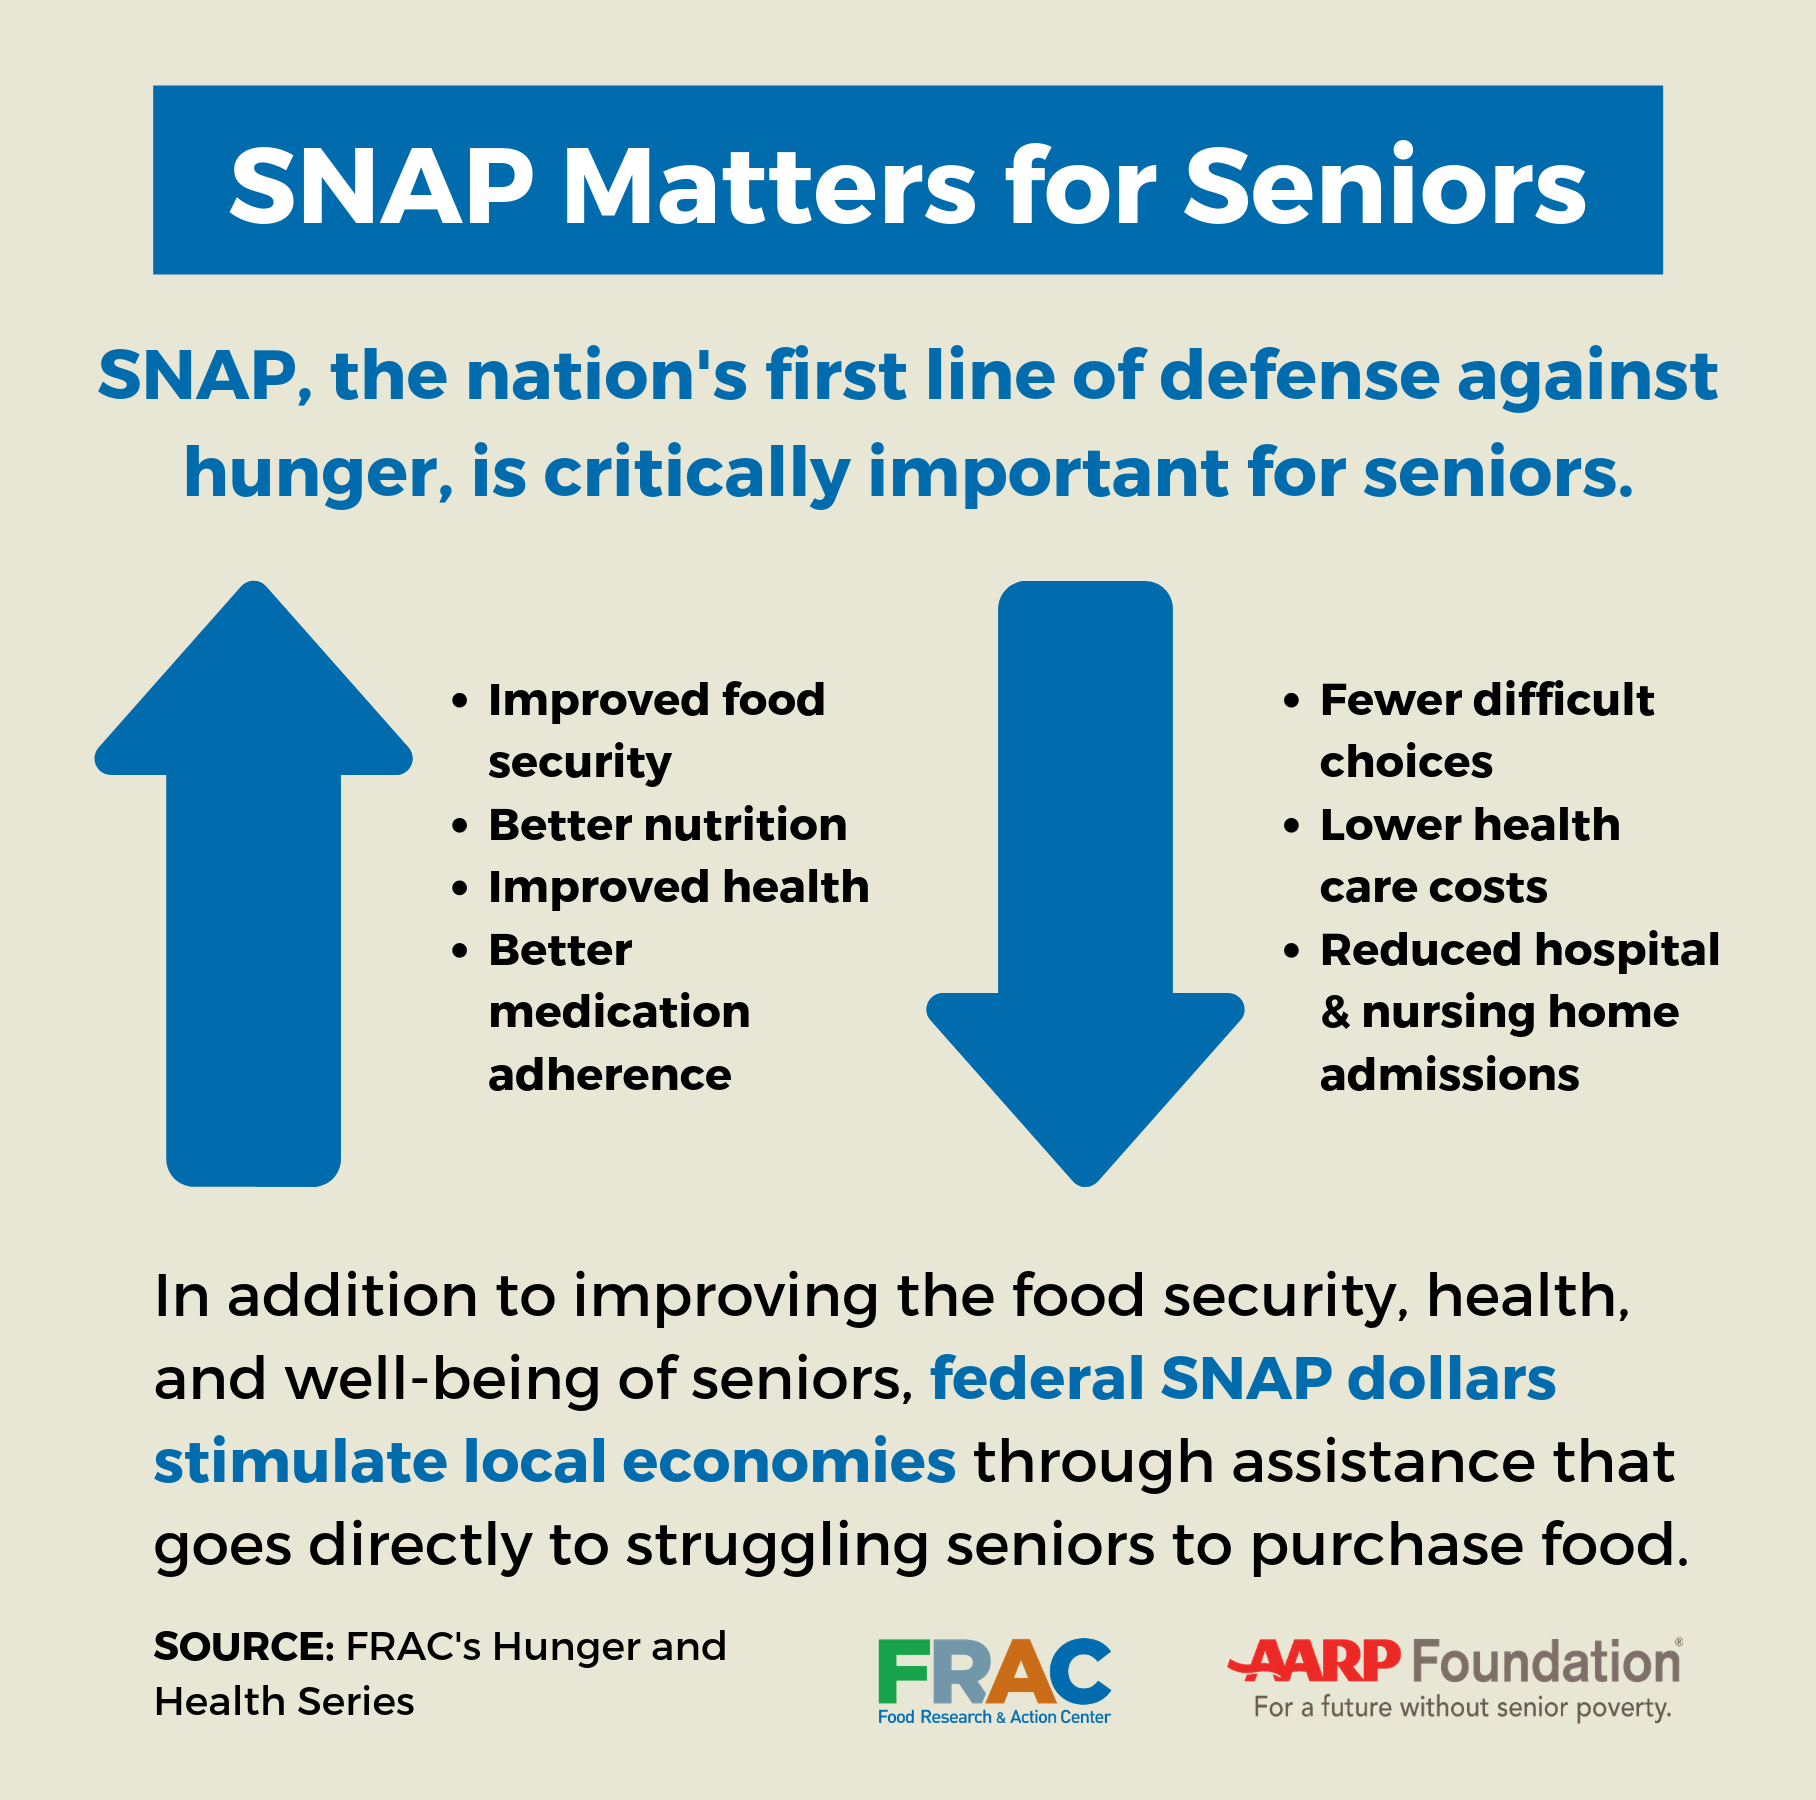 Enhanced SNAP Benefits Must Be Permanent to Stave Off Hunger in Older Adults